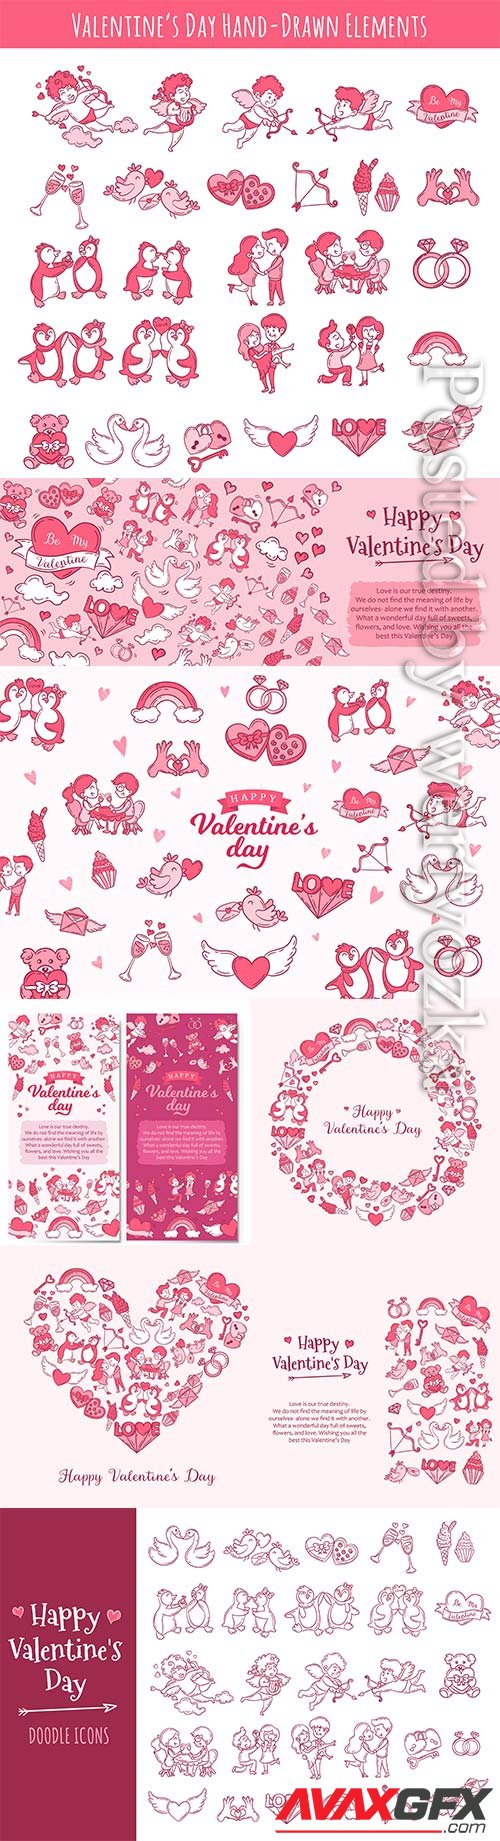 Valentine's day greeting card with doodle icons and text